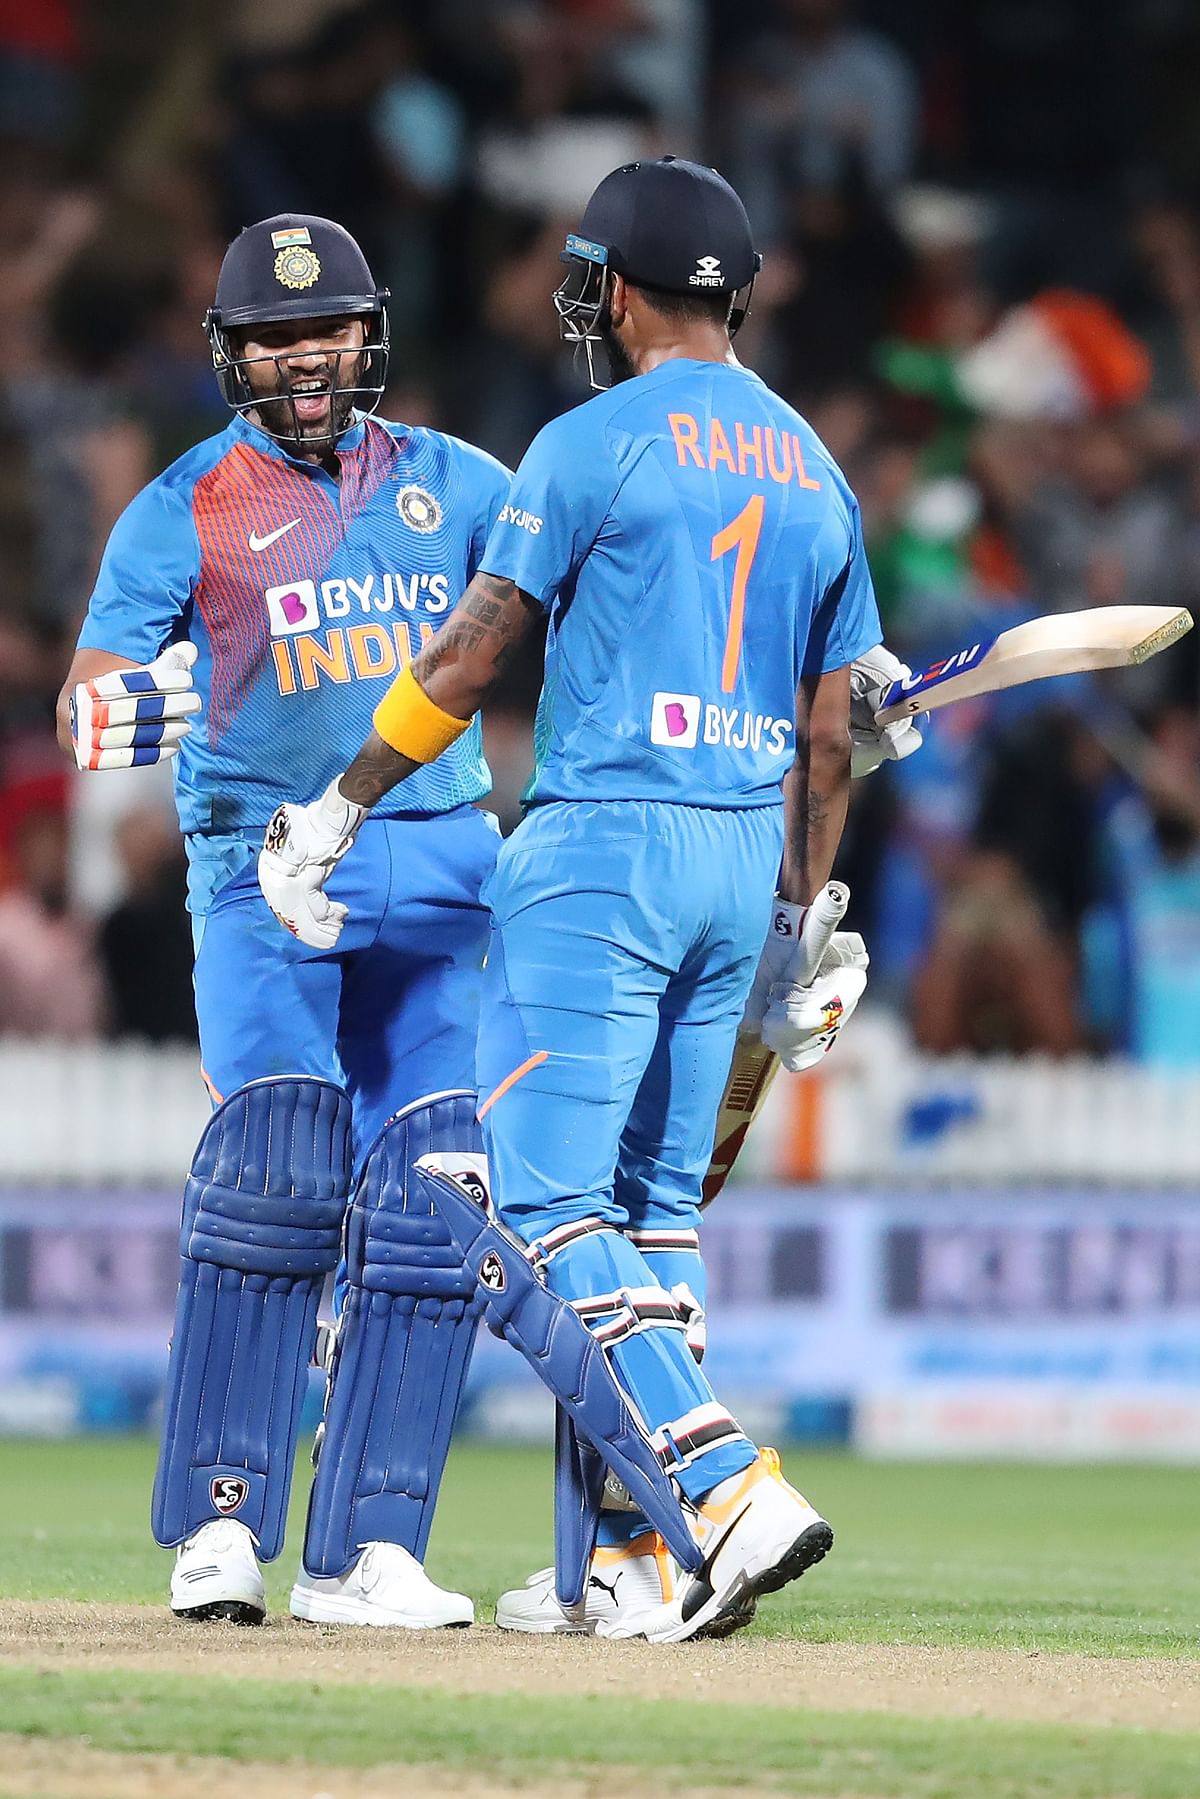 India beat New Zealand in Super Over to take unassailable 3-0 lead in T20 series